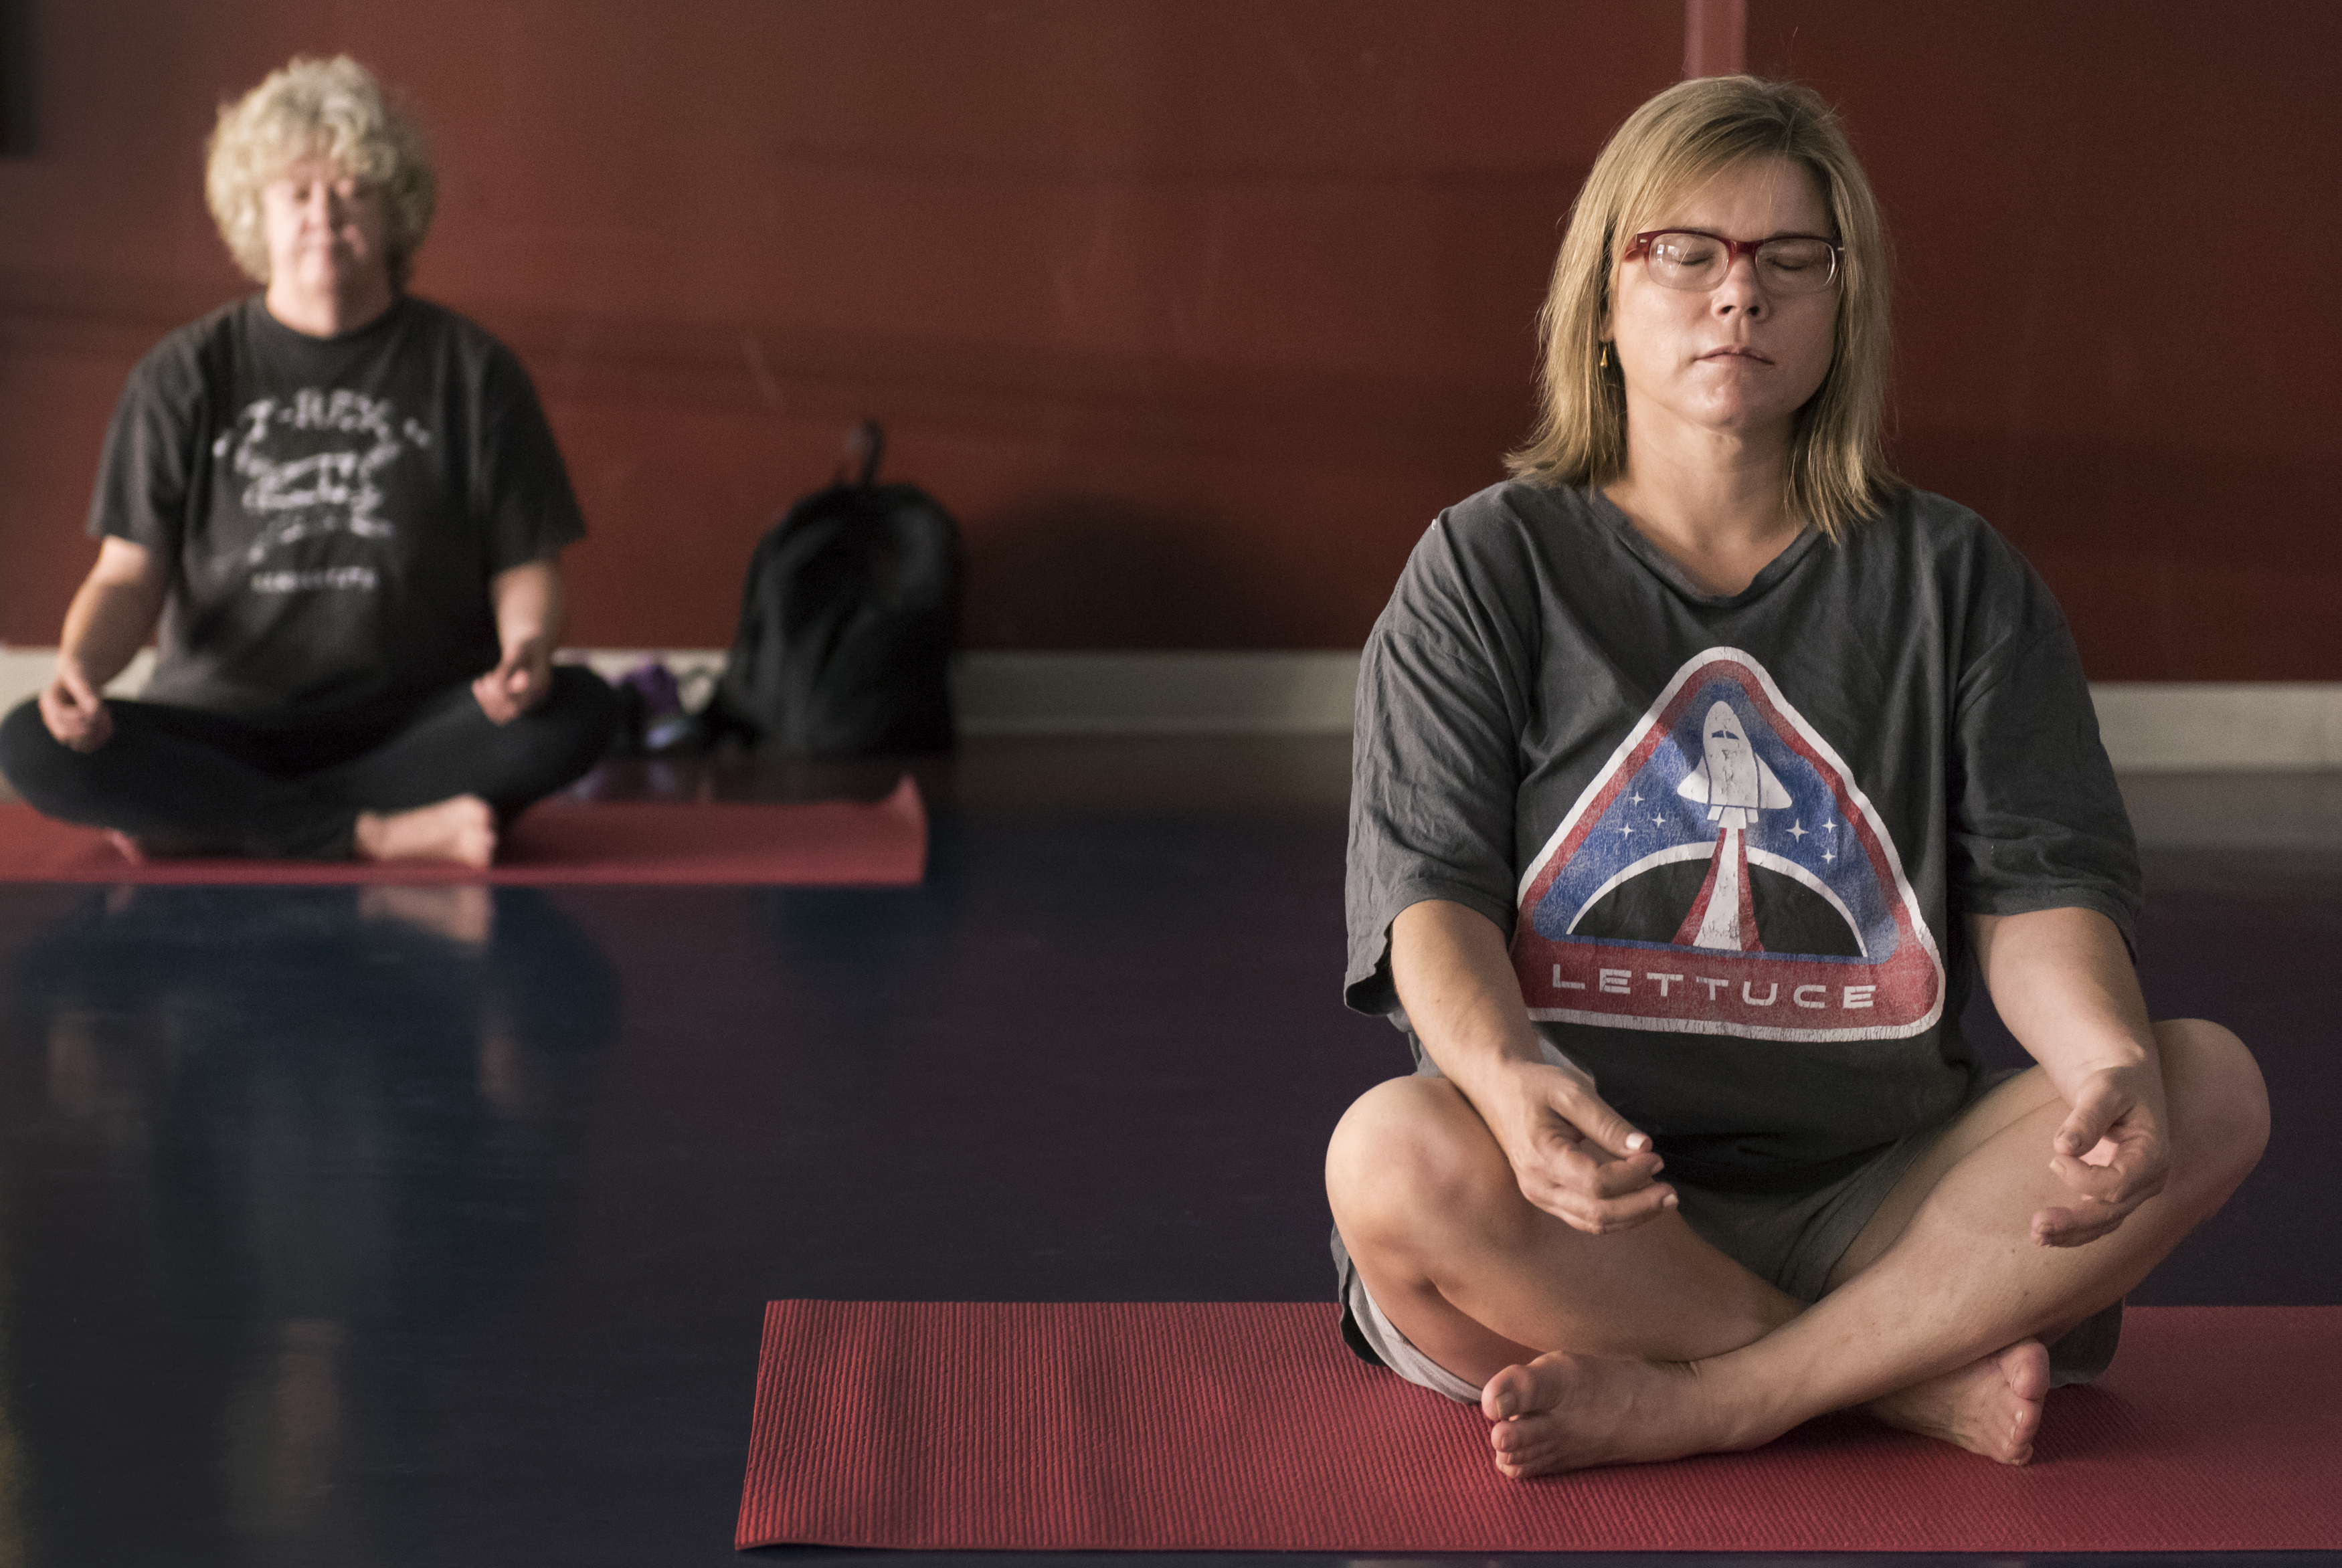 Meditation during the Restorative Yoga class at UALR's Donaghey Student Center on September 8, 2015.